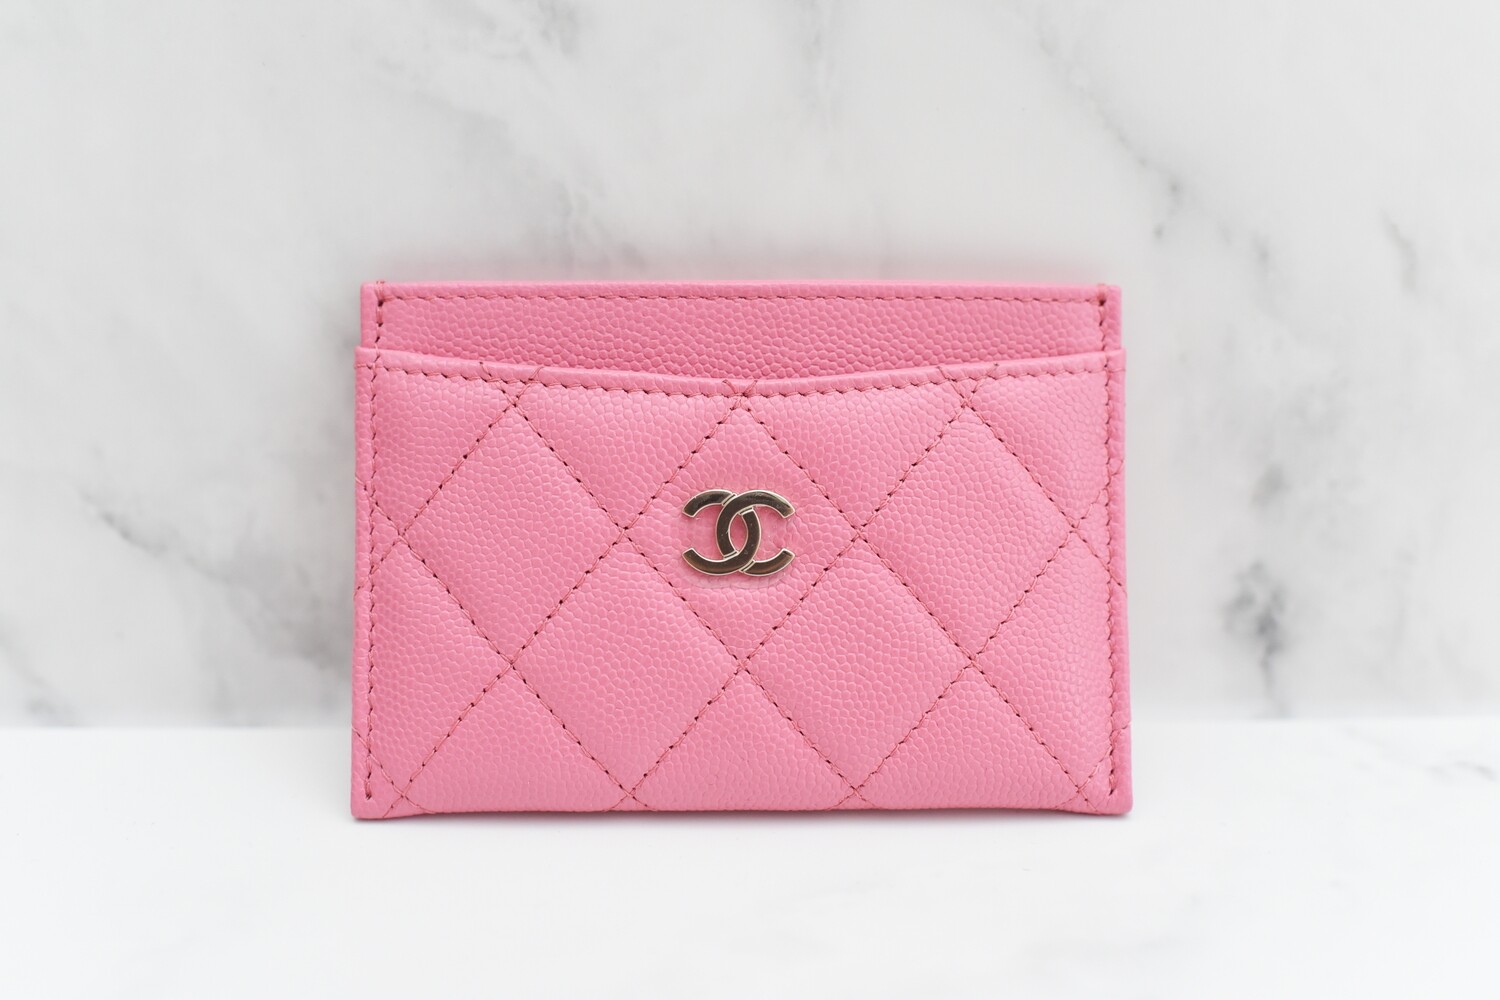 Chanel SLG Flat Cardholder, Pink Caviar Leather, Gold Hardware, New in Box